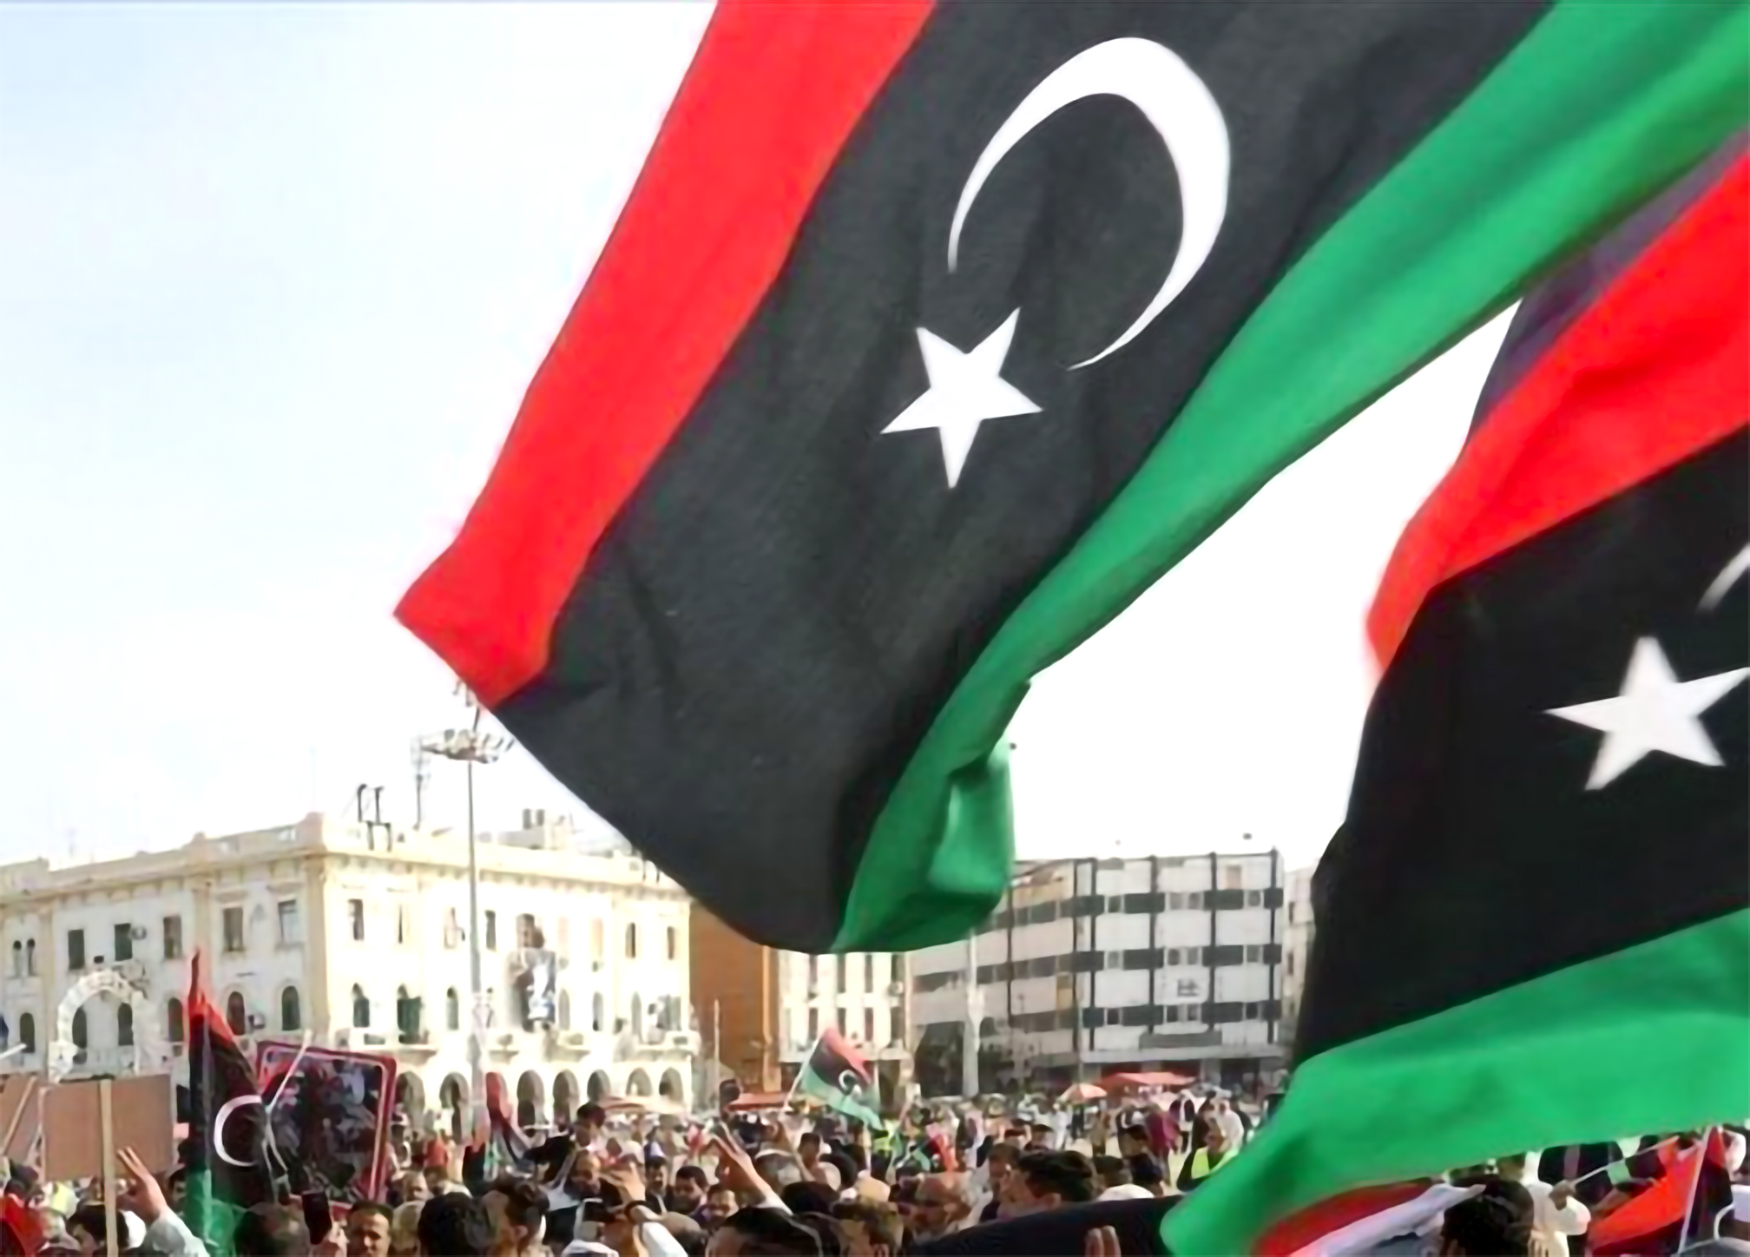 A Moroccan Ministerial Delegation to Visit Libya to Discuss Strengthening Cooperation Between the two Countries